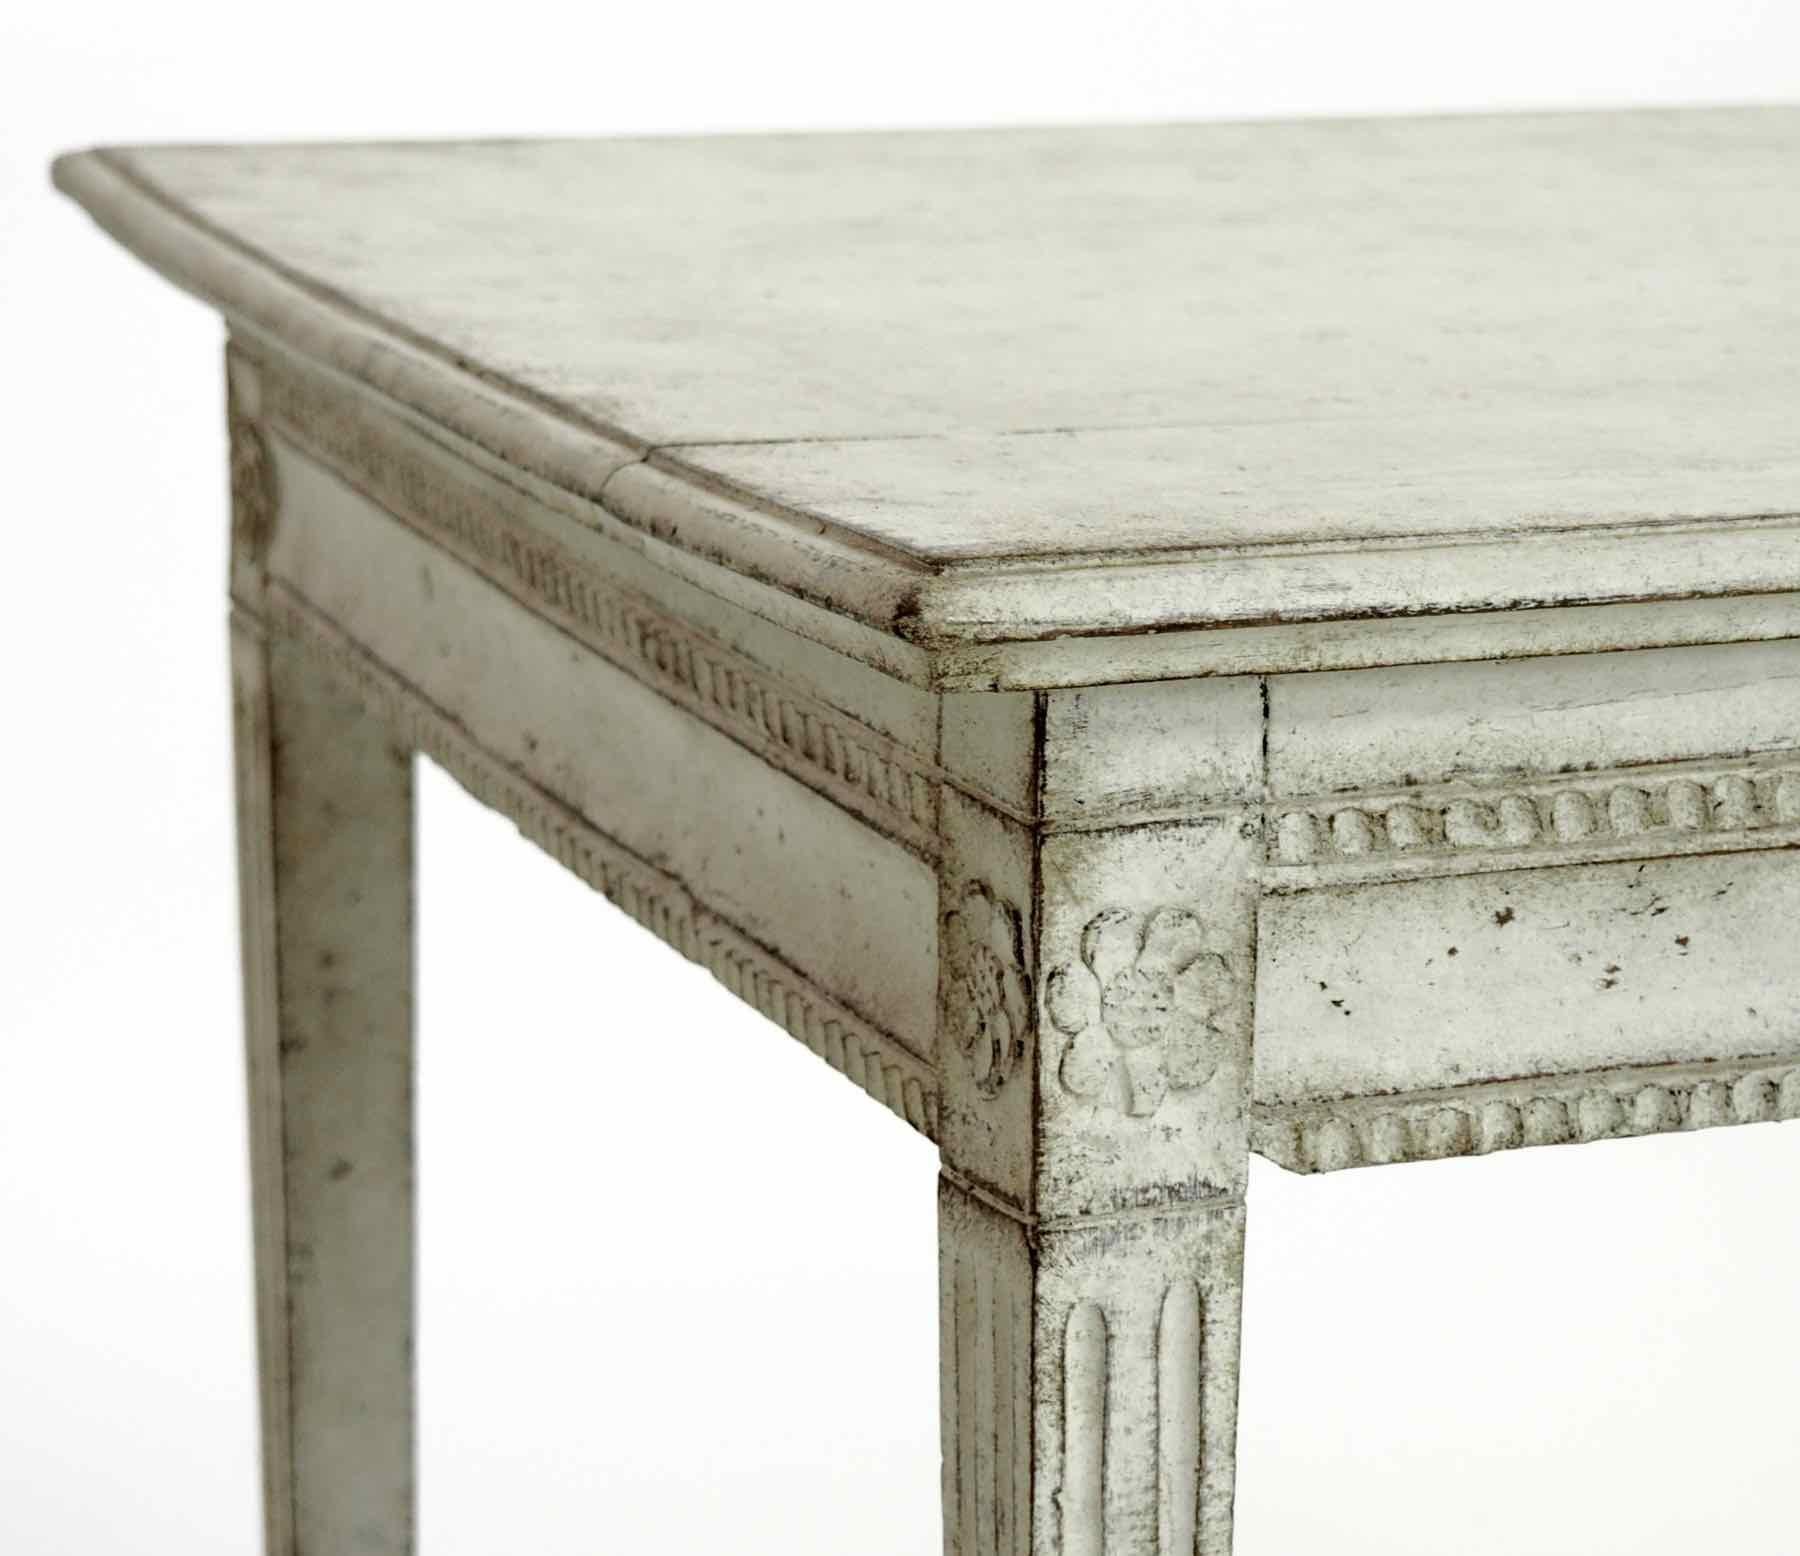 Freestanding Gustavian console table, with one drawers, in a beautiful color and patina, circa 1790. Fantastic original carvings.
Measures: H 73, W 86, D 63 cm.
H 28.7, W 33.8, D 24.8 in.